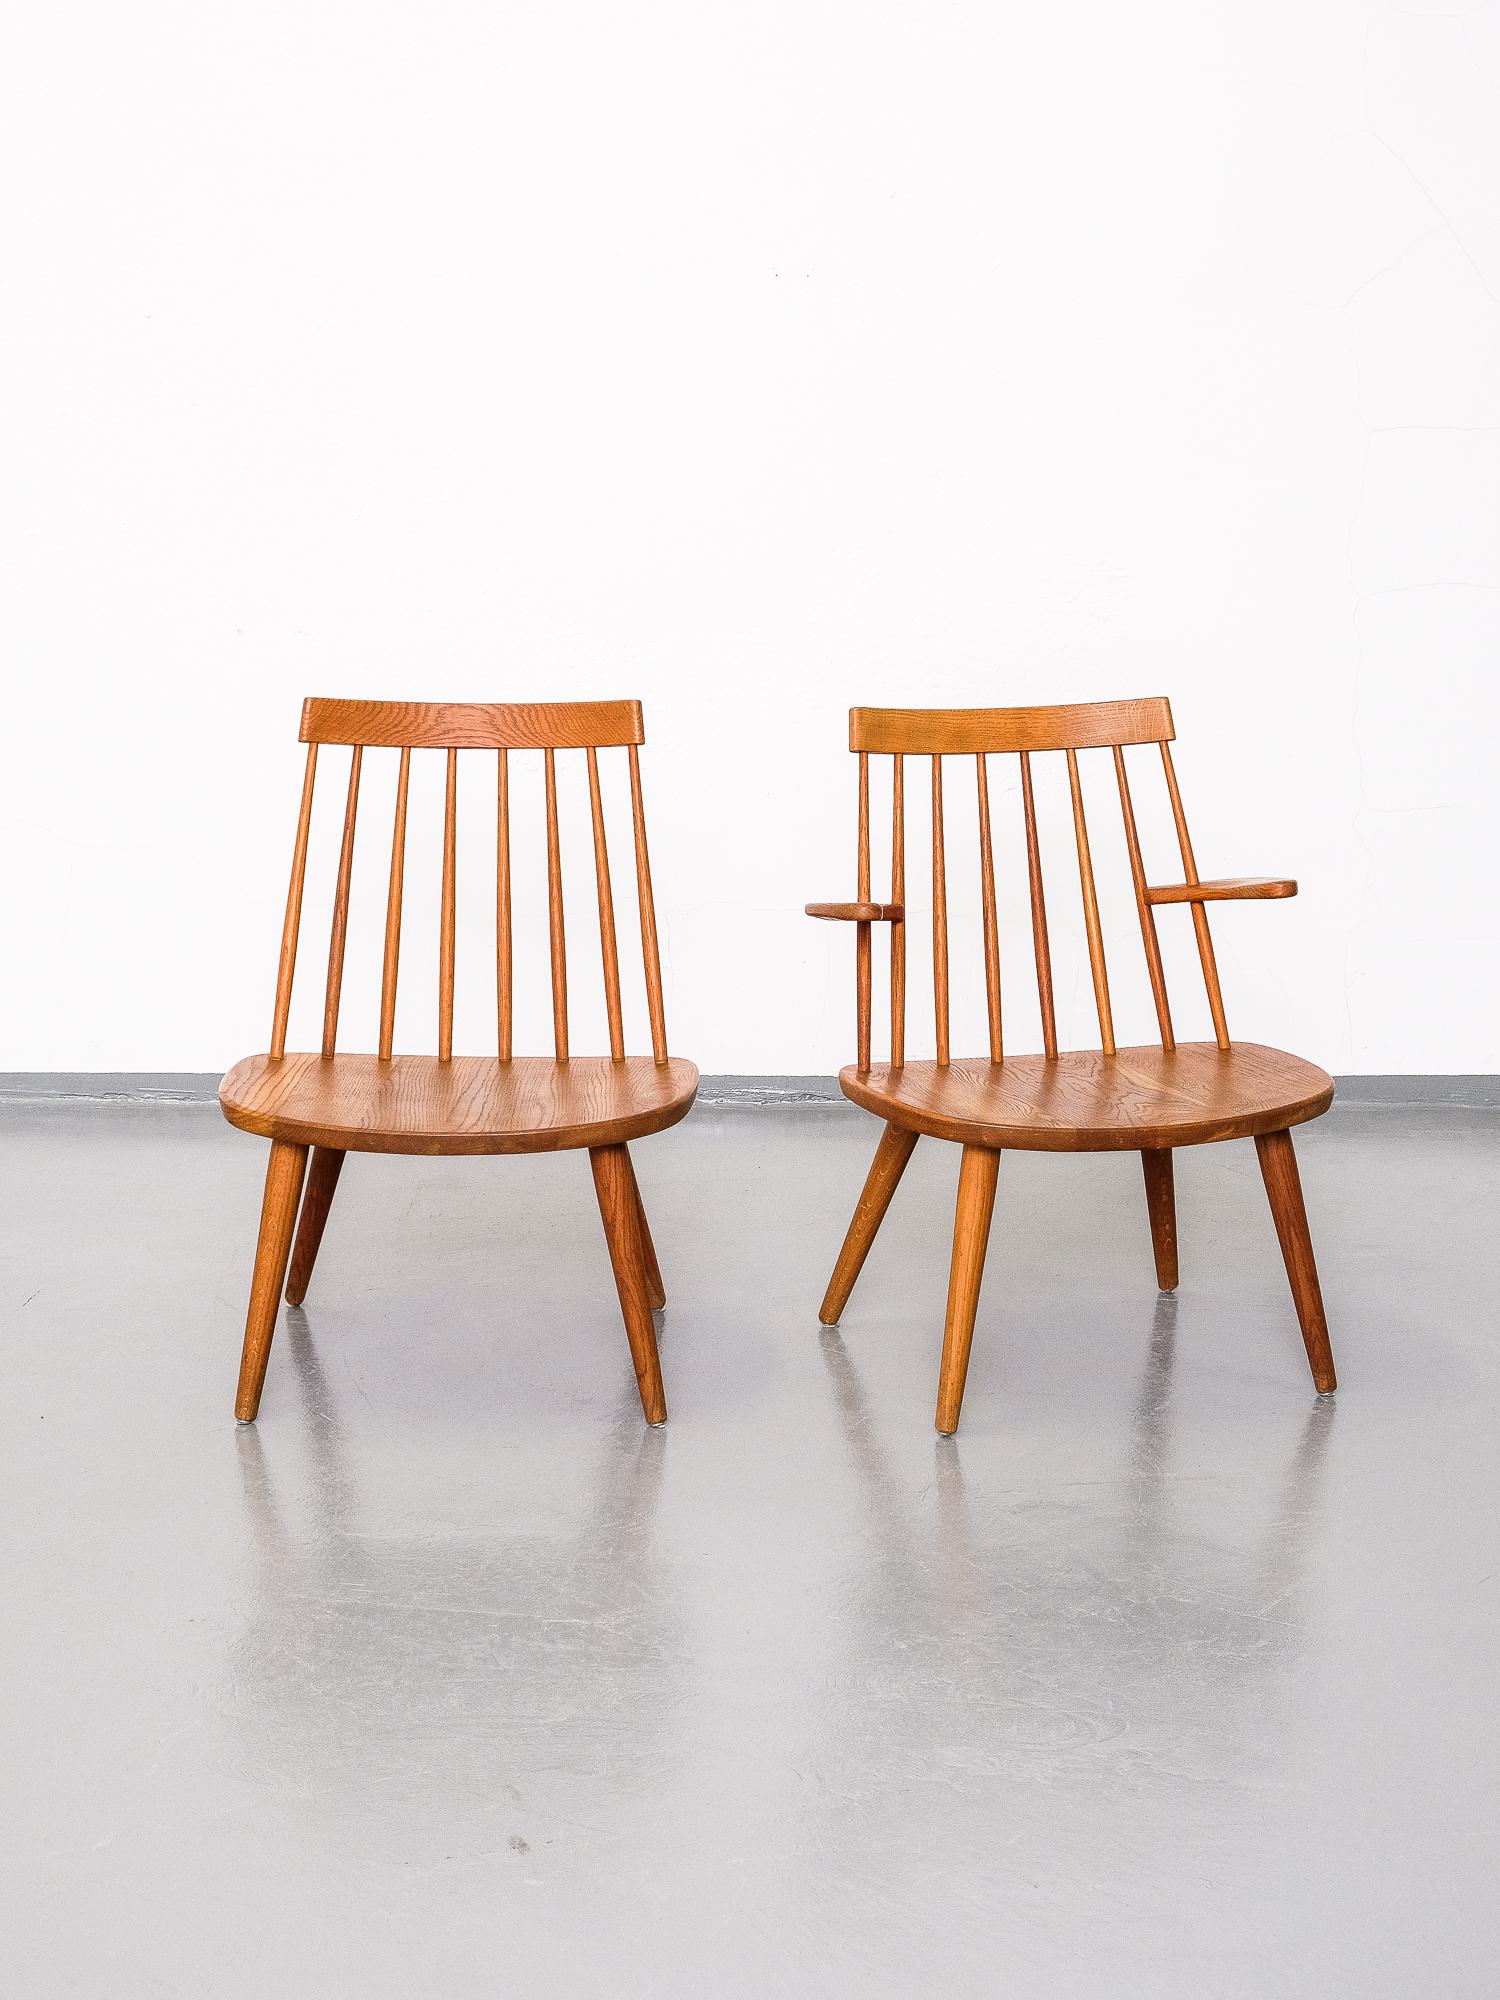 Model ‘Sibbo’ easy chairs with oak frame and one with armrests. Designed by Yngve Ekström and manufactured by Stolab in Sweden, circa 1950s.

Nice vintage condition with pretty patina.